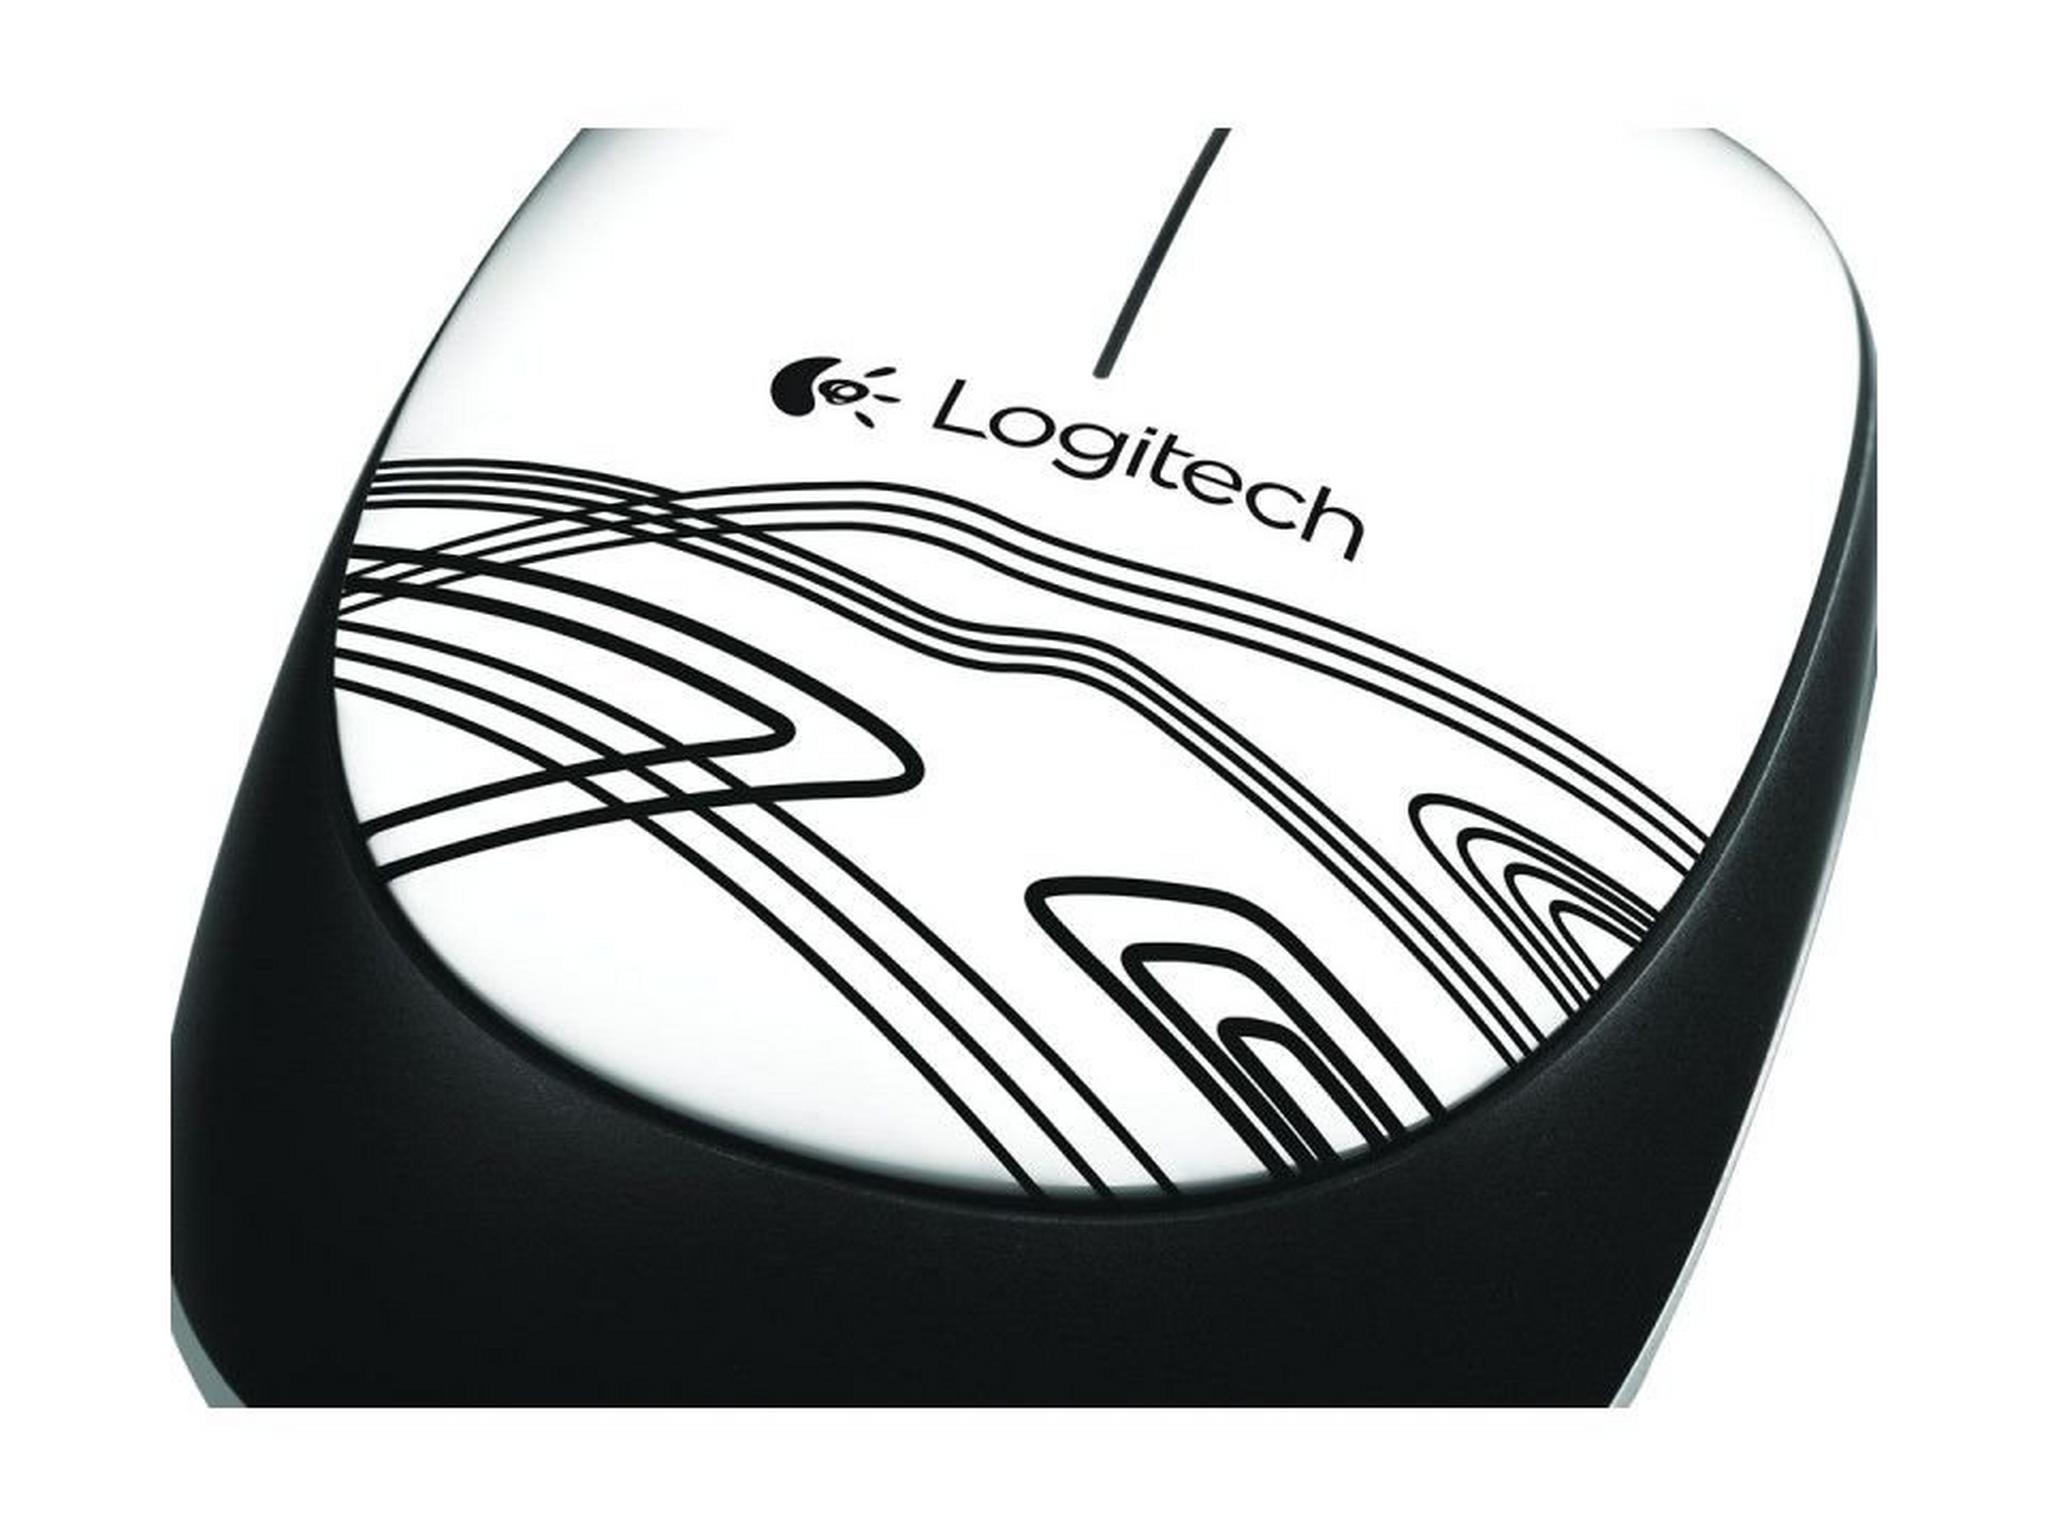 Logitech M105 Wired Optical Mouse - White